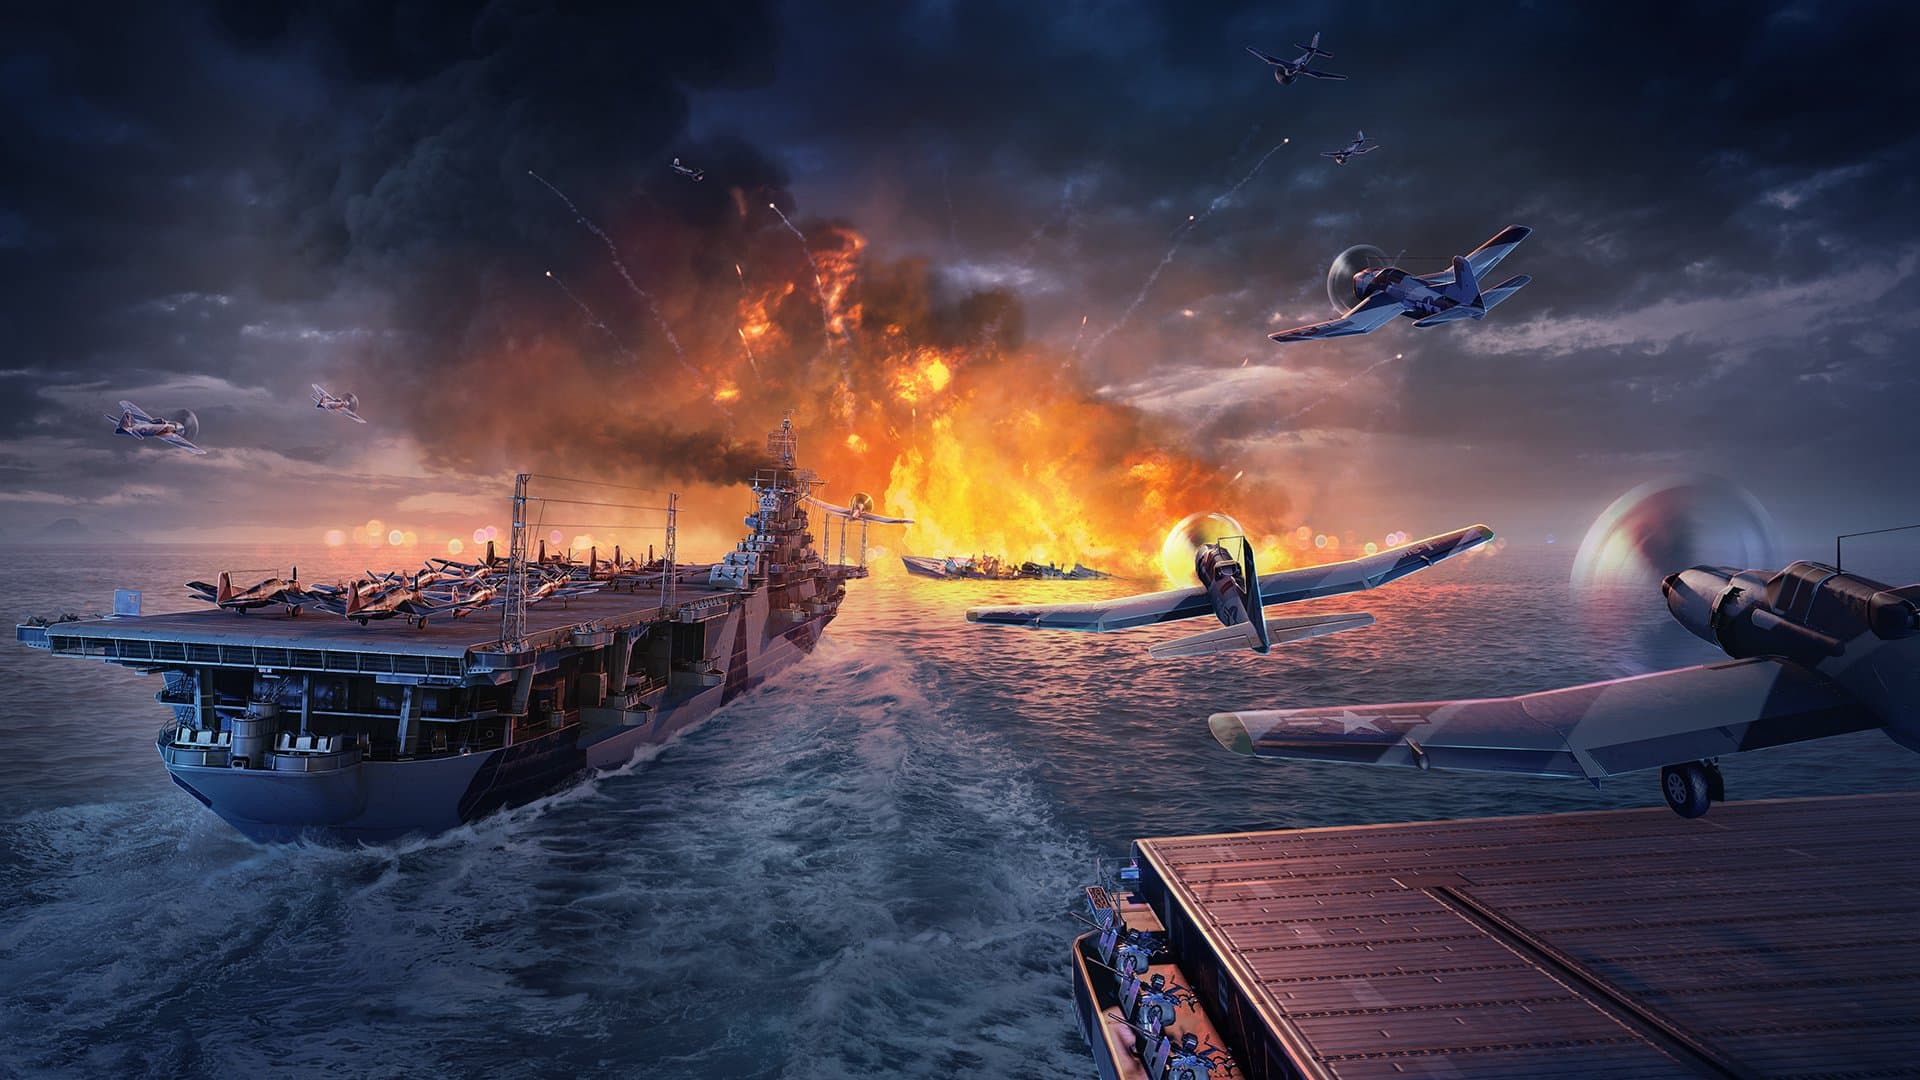 Essex_US_T10_Art_release_13-0_1920x1080_WOWS